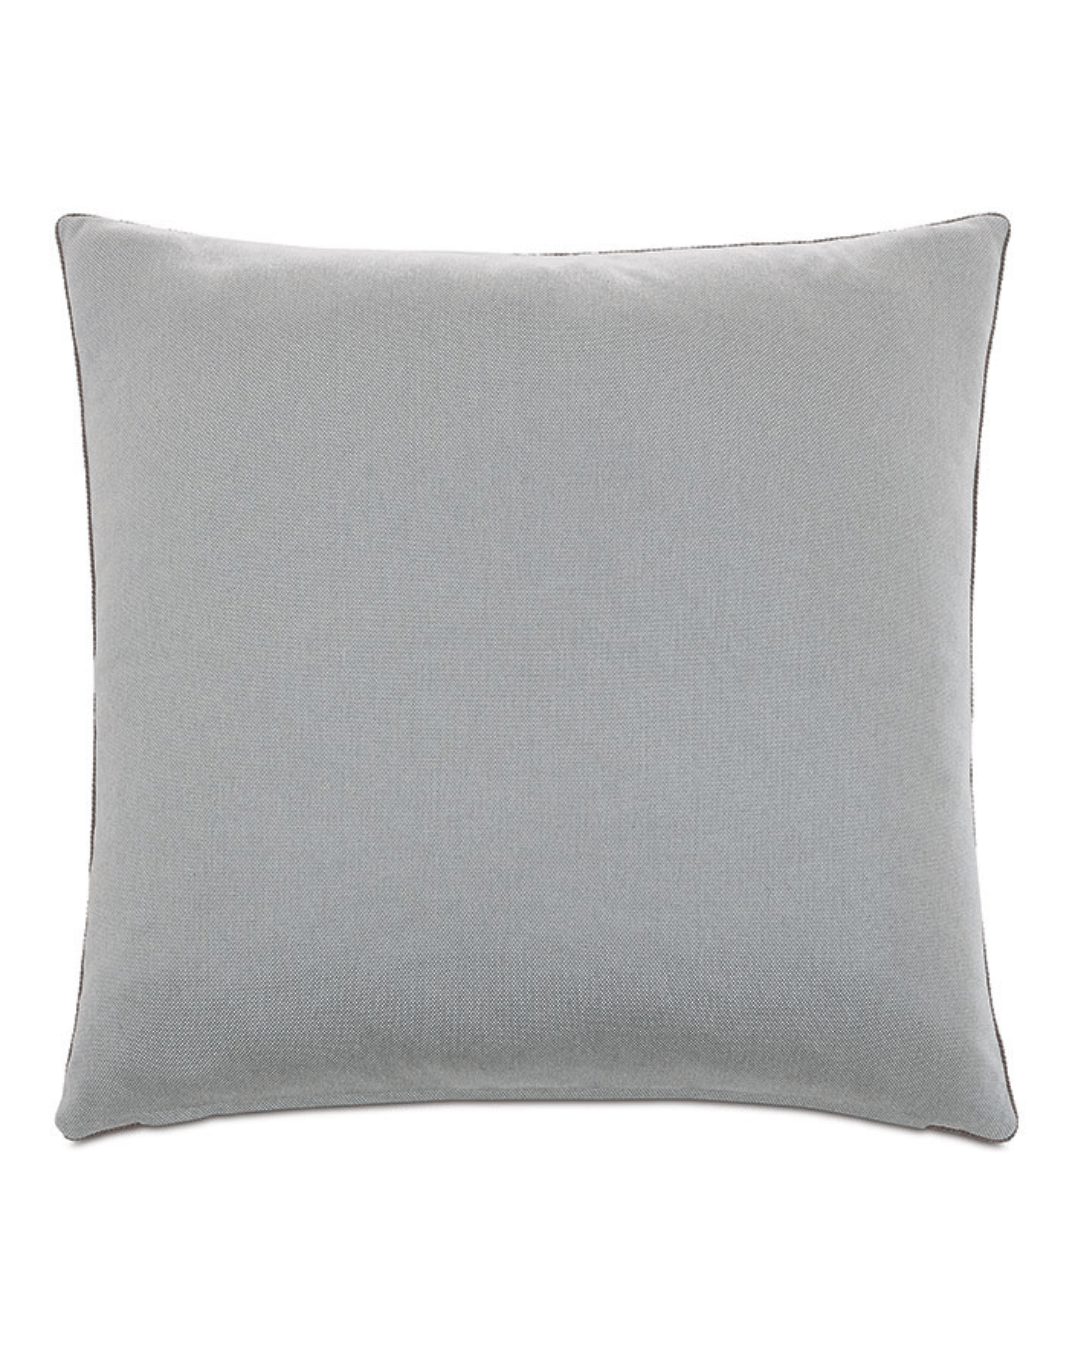 A plain light gray square Eastern Accents HIG GRAPHIC DECORATIVE PILLOW isolated on a white background in a Scottsdale bungalow.